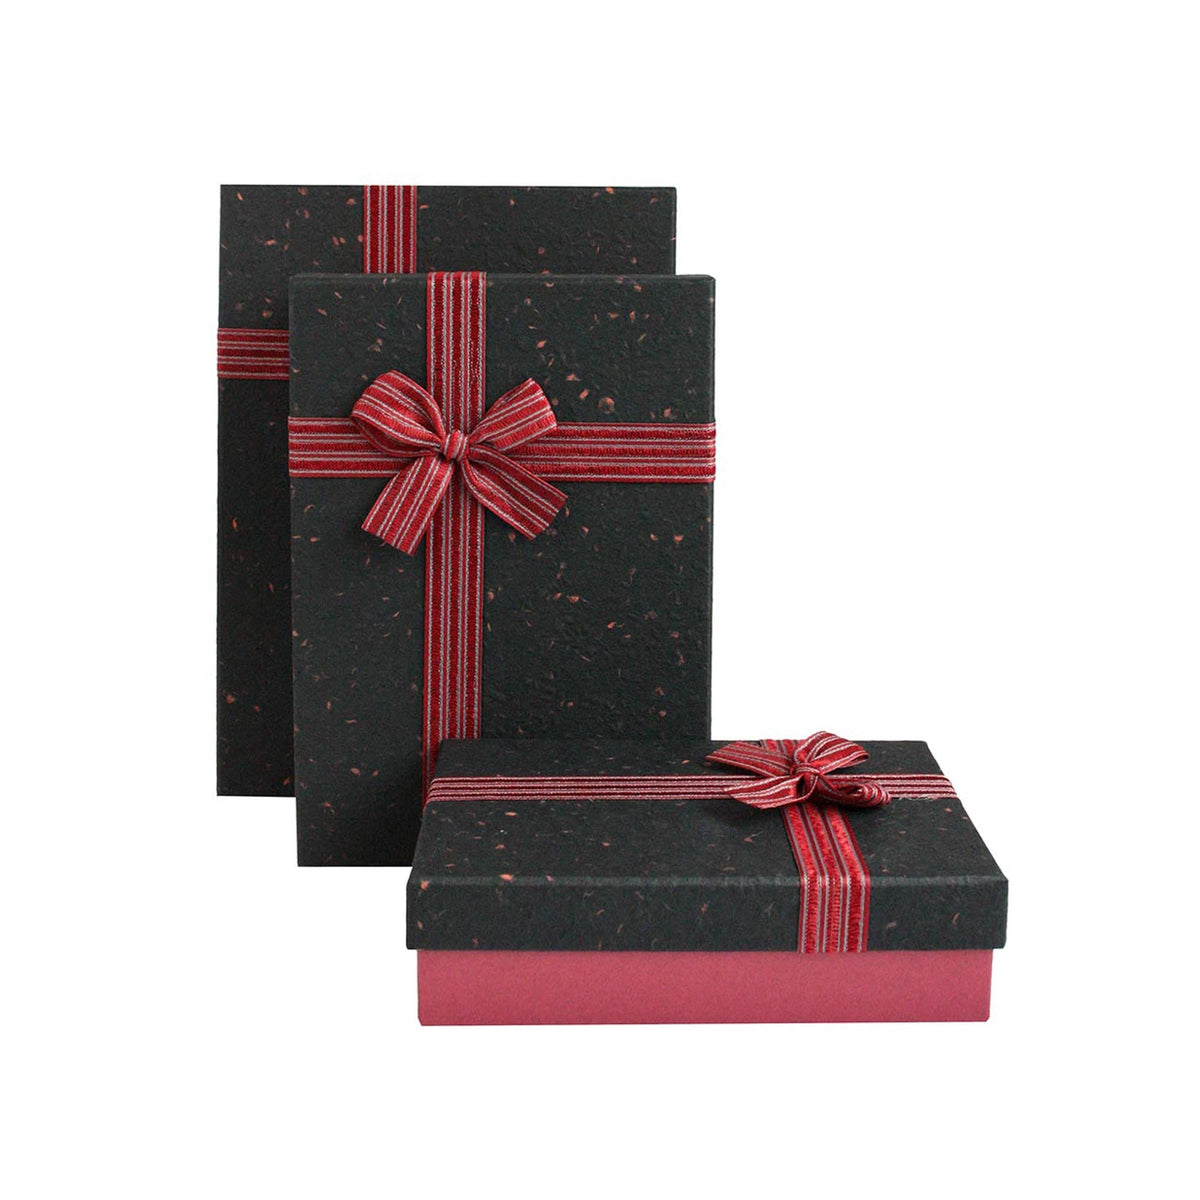 Set of 3 Burgundy/Black Gift Boxes With Red Striped Ribbon (Sizes Available)